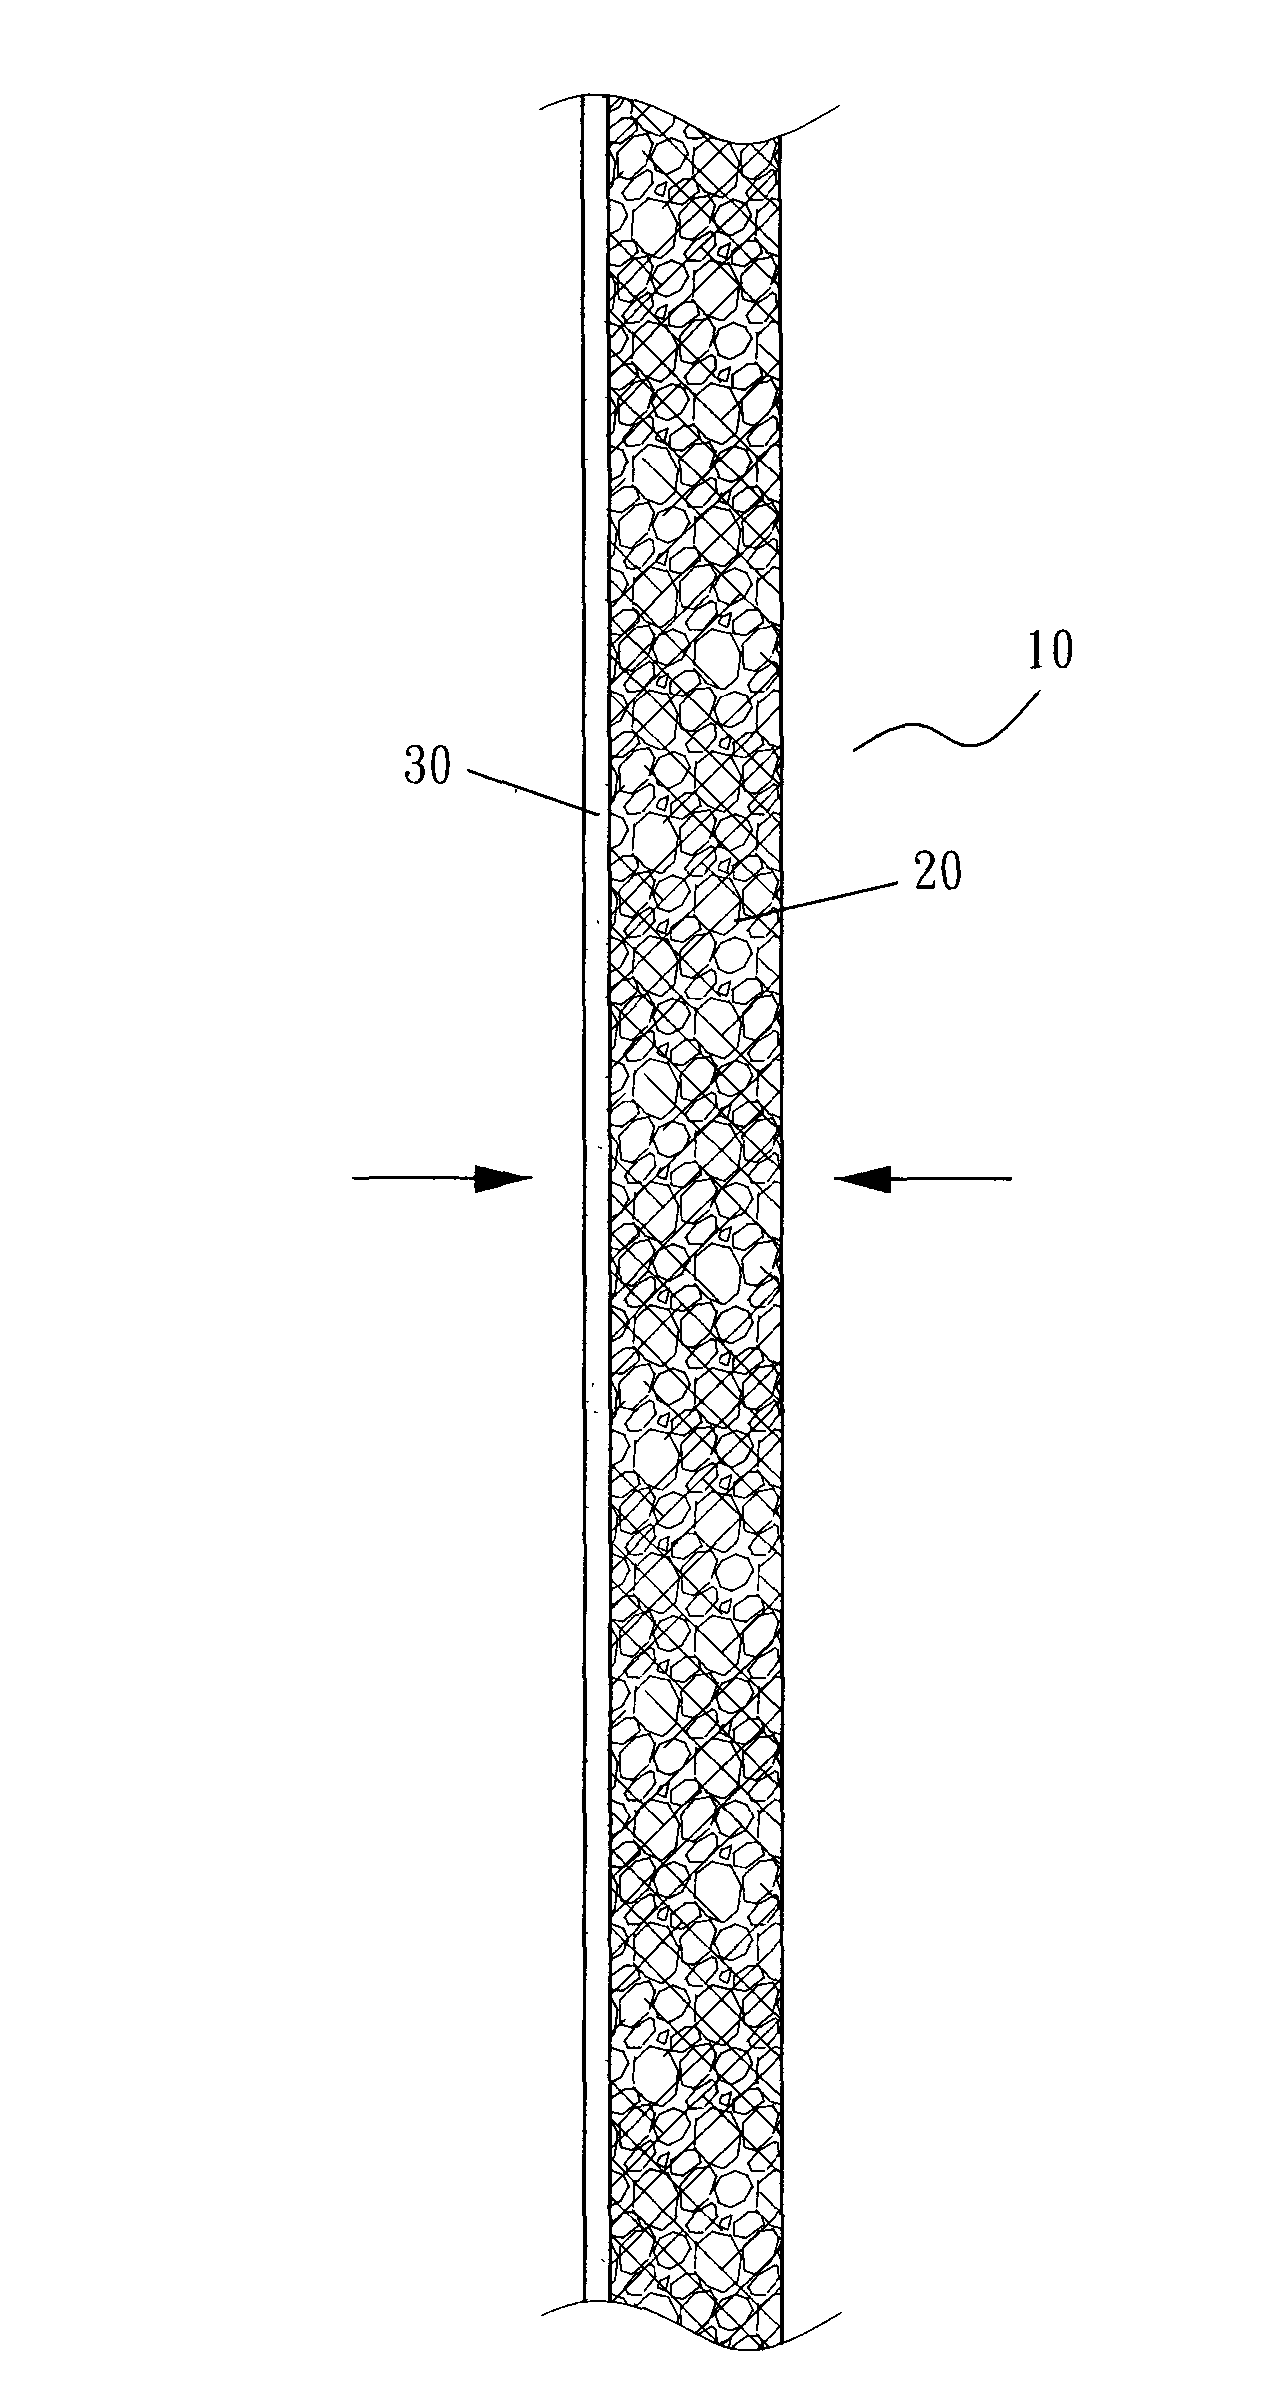 Composition structure of sound absorption and insulation composite material